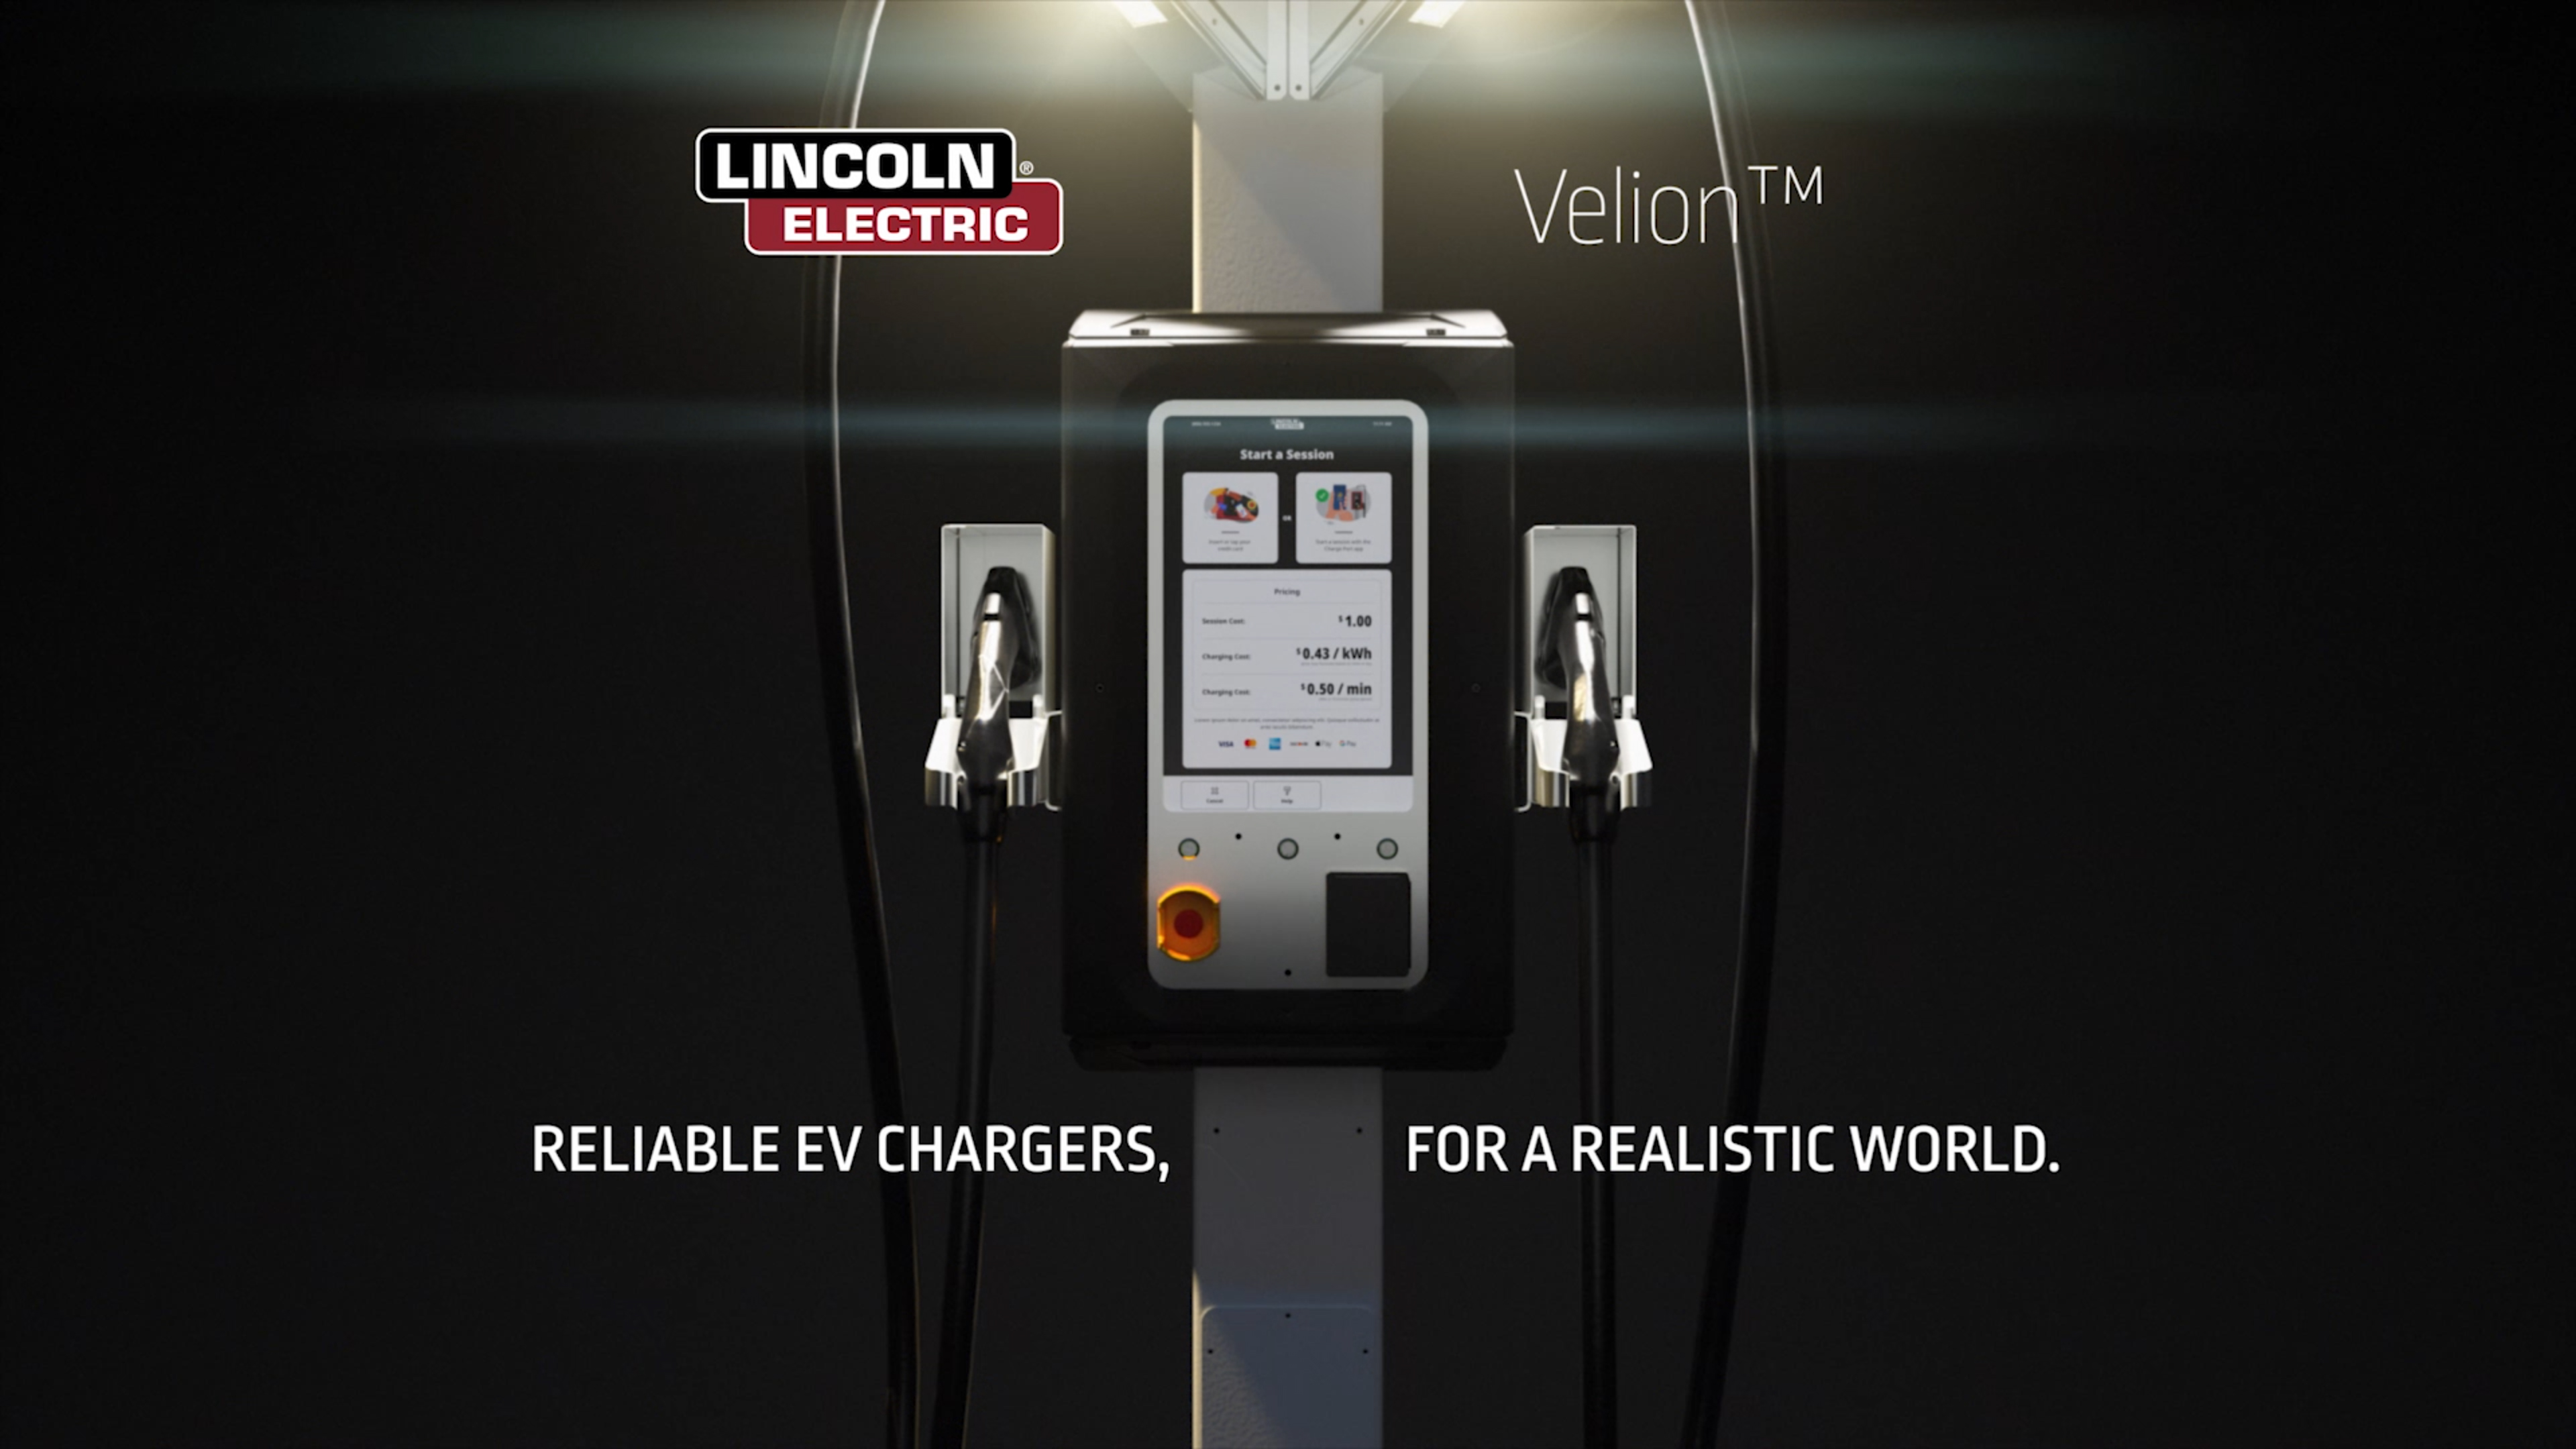 Redefining Reliability - Velion™ Electric Vehicle DC Fast Charger